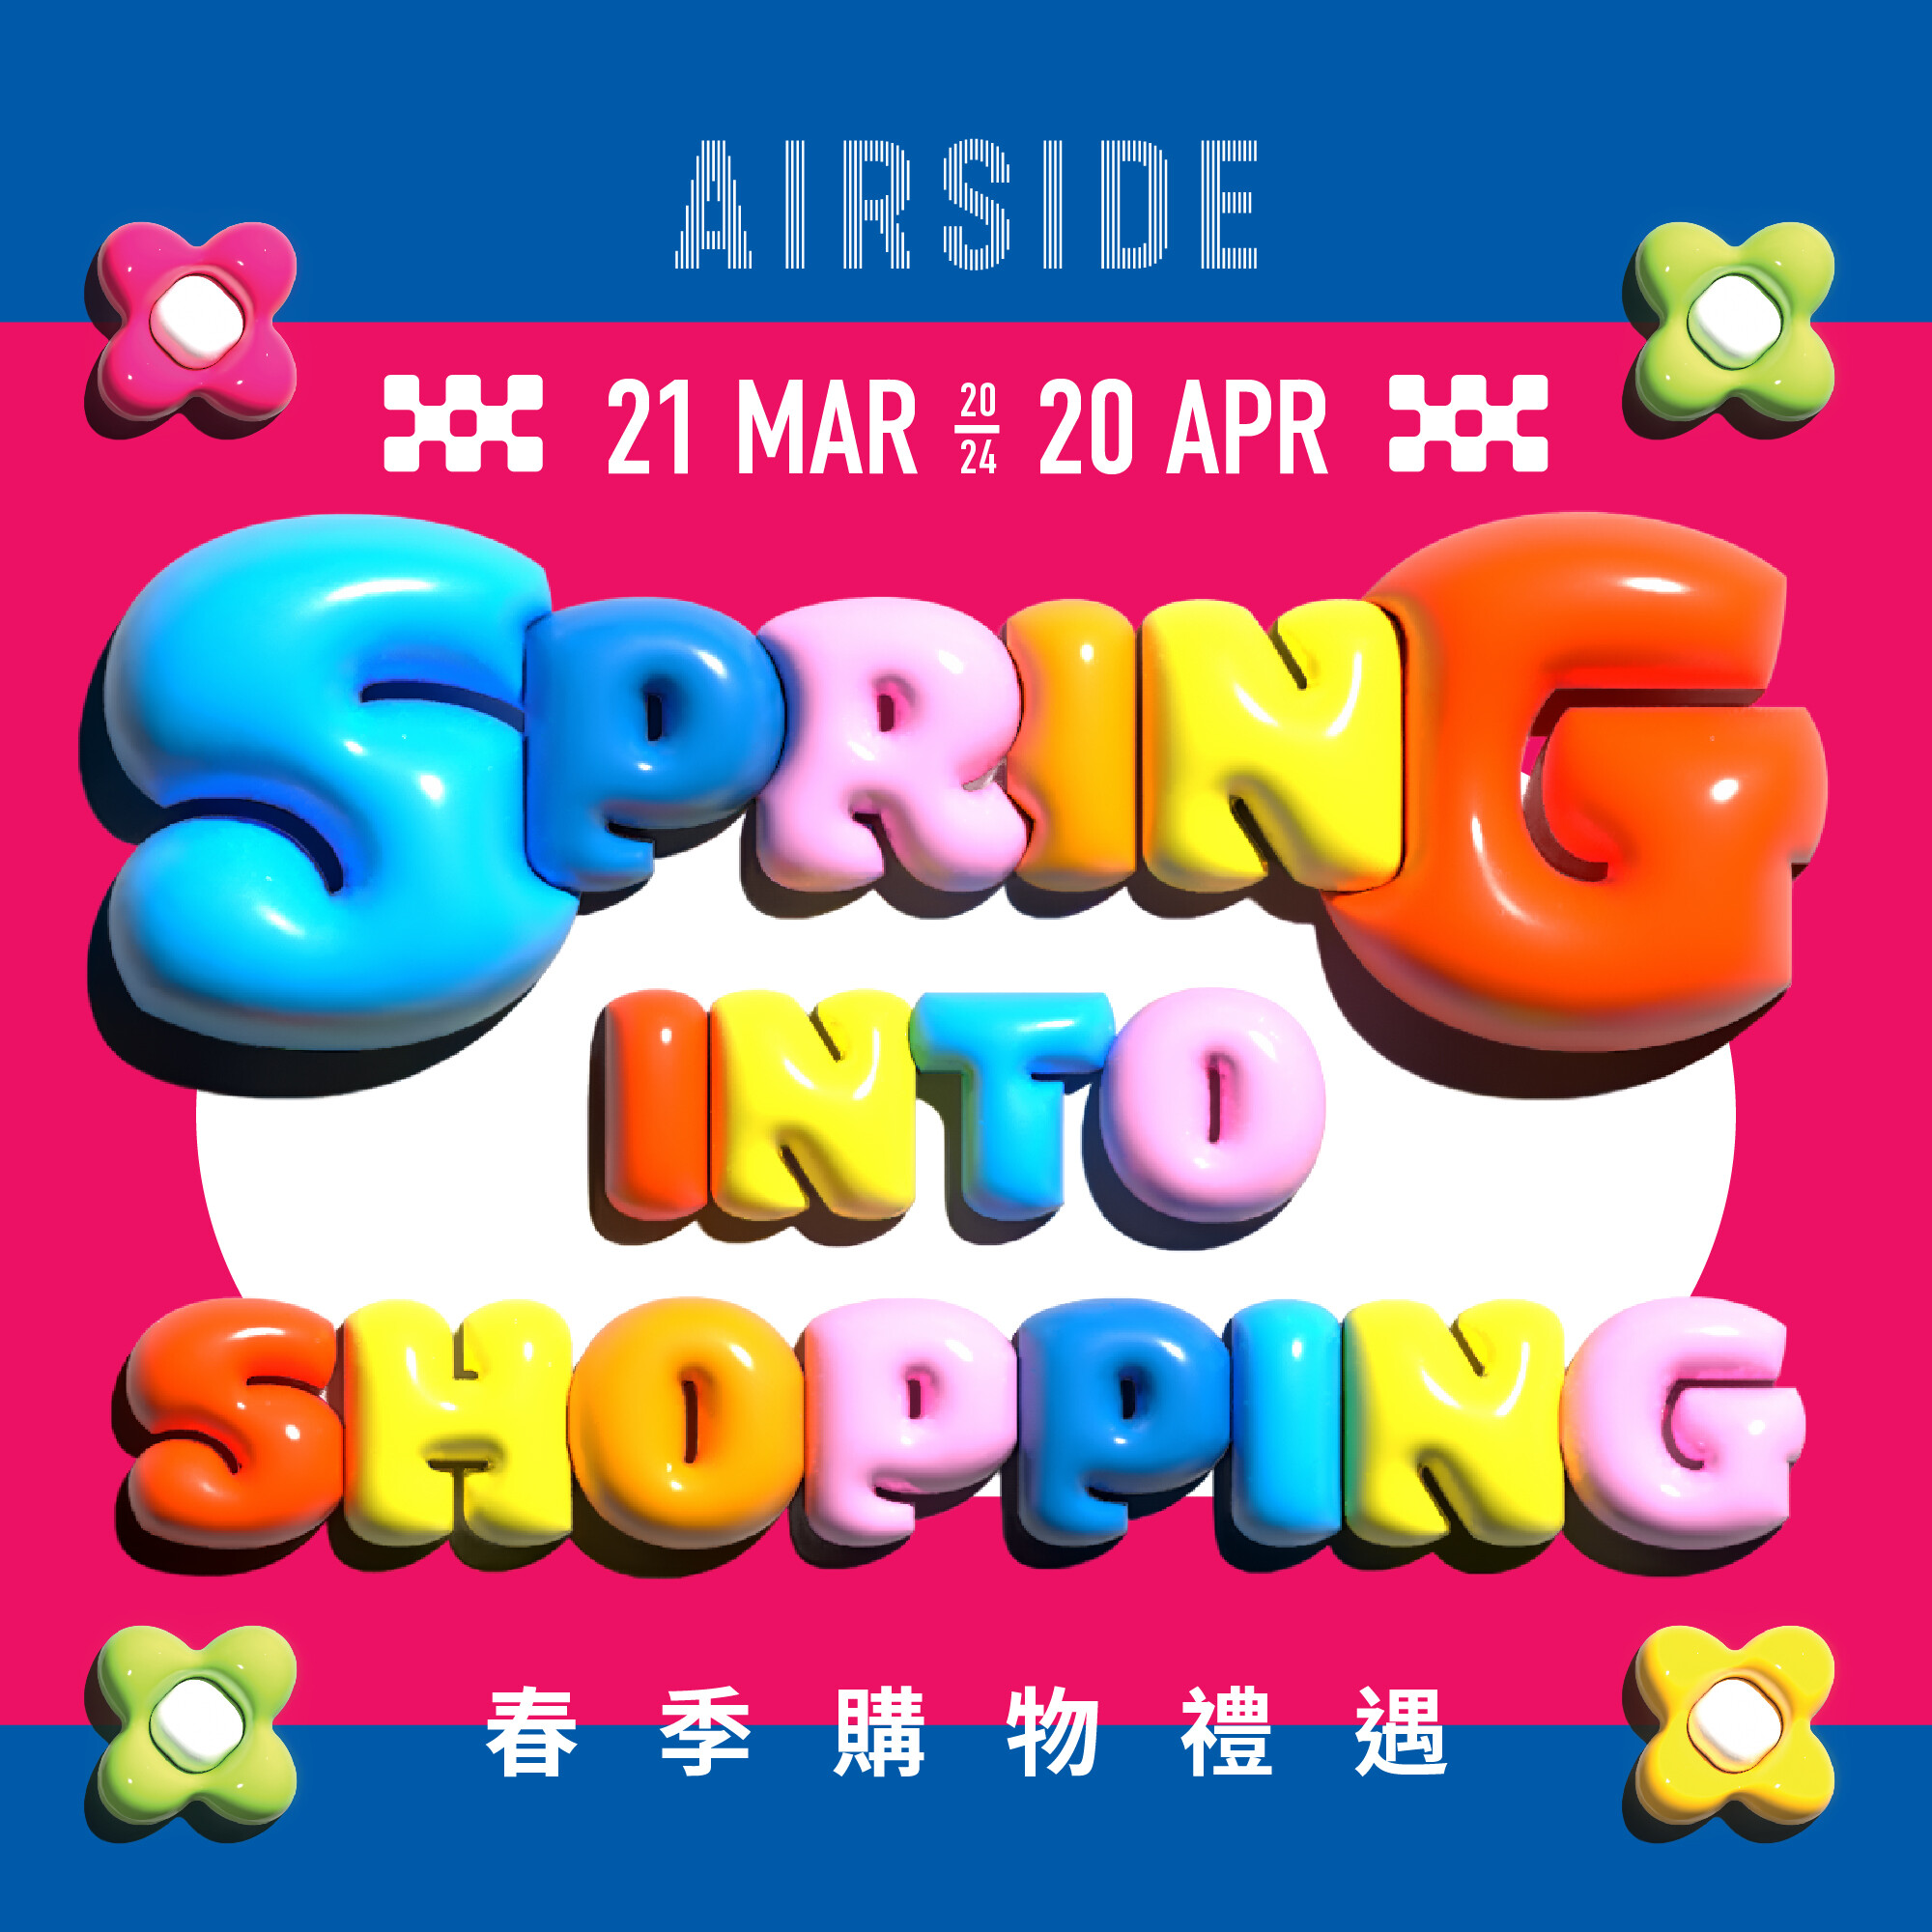 “Spring into Shopping“ Promotion